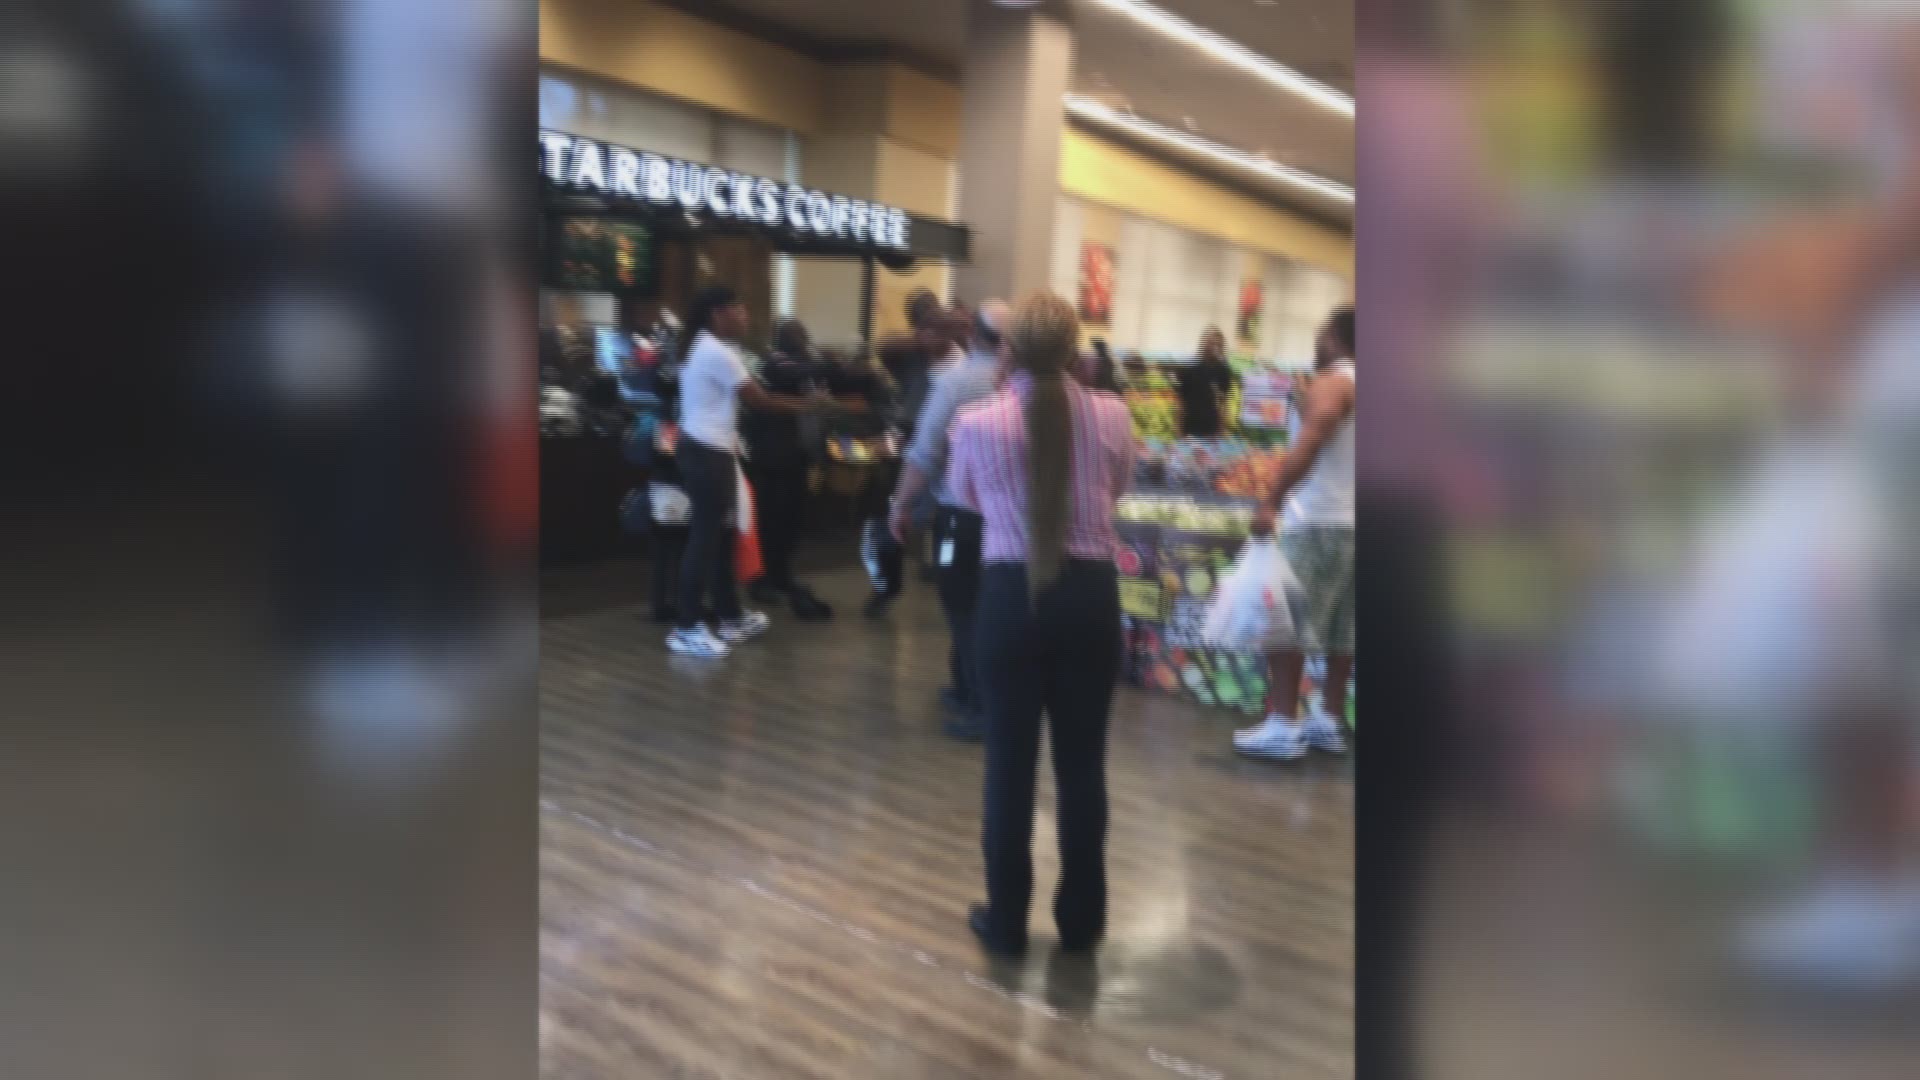 D.C. police are investigating what lead to a violent incident at a Safeway in the Petworth neighborhood. A witness at the scene shared a video of a security guard grabbing a man by his neck and slamming him to the floor at the Safeway on Georgia Avenue and Randolph Street in Northwest. The guard told police the man was trying to steal from the store prompting the guard to approach him.